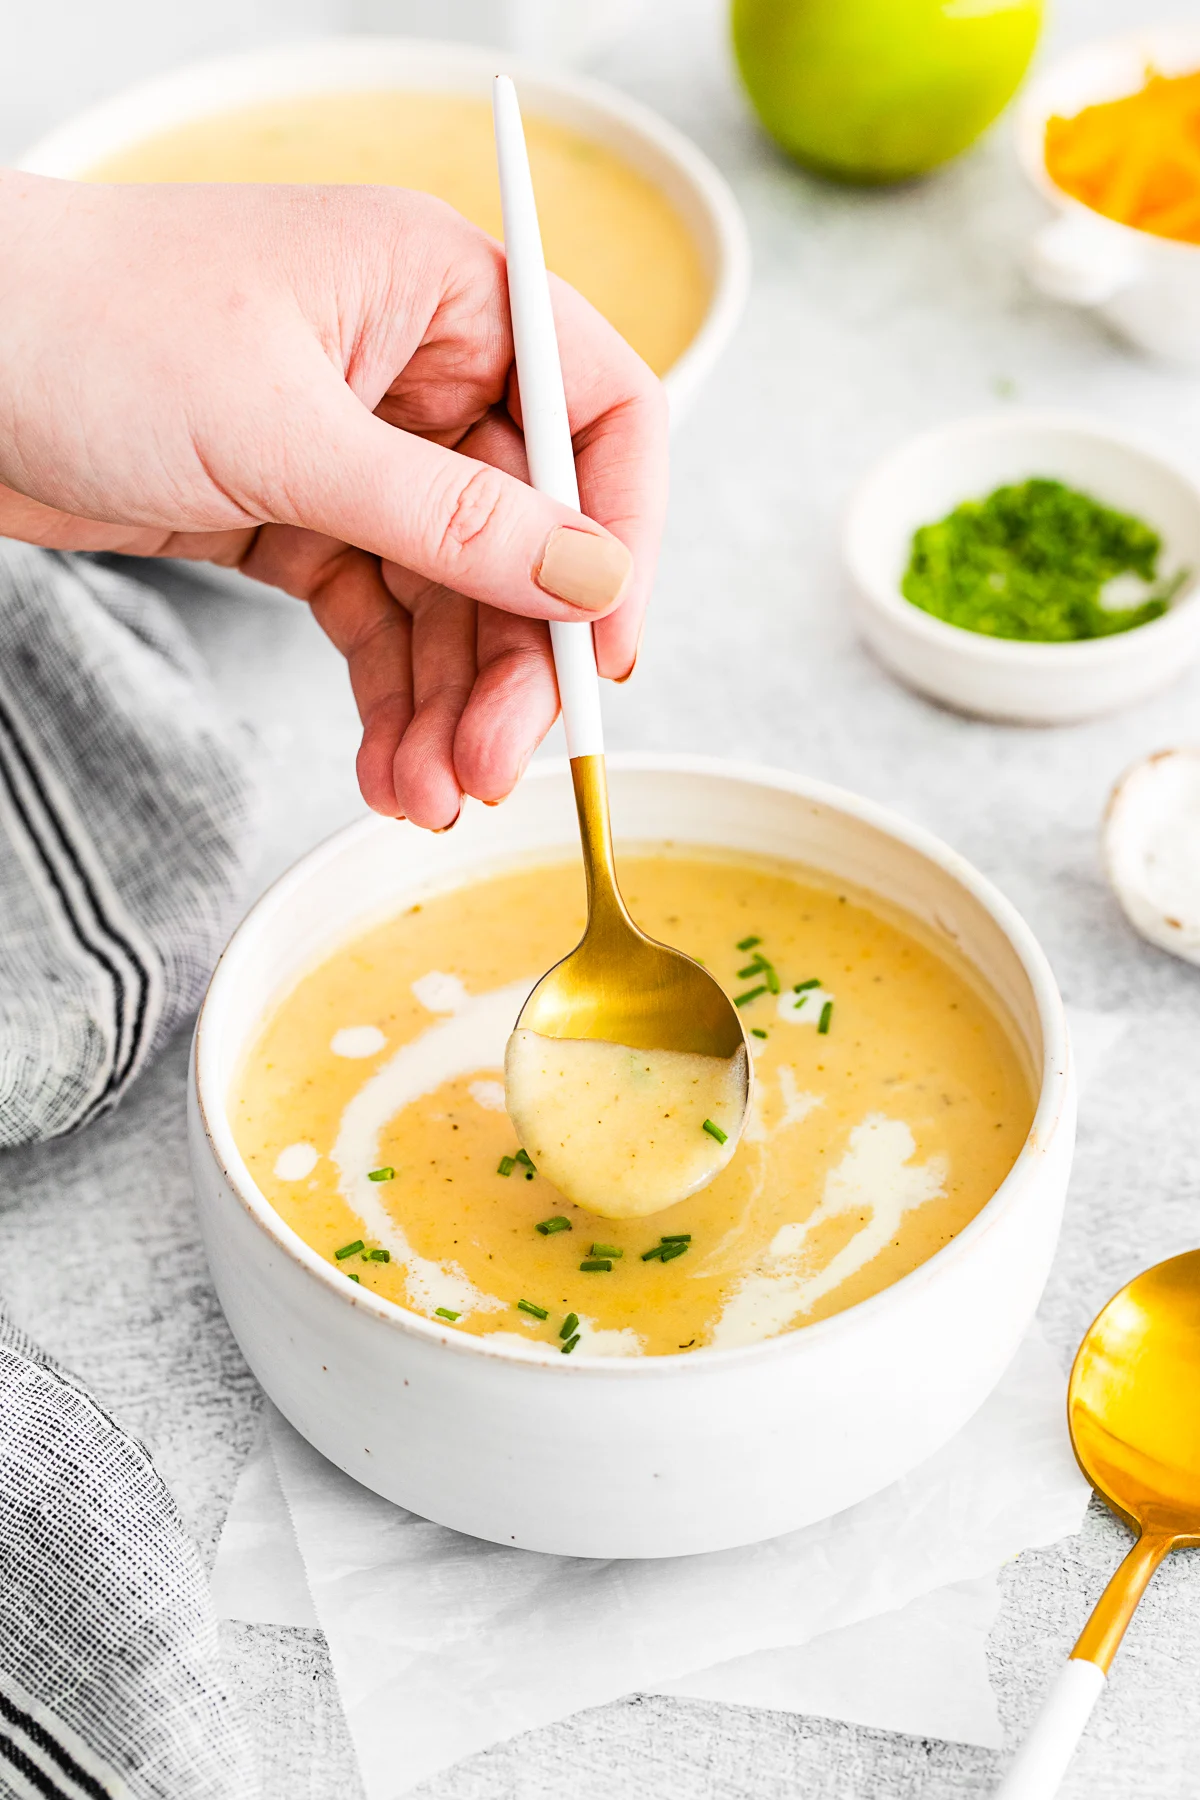 A hand spooning out a bite of Apple Cheddar Soup. 